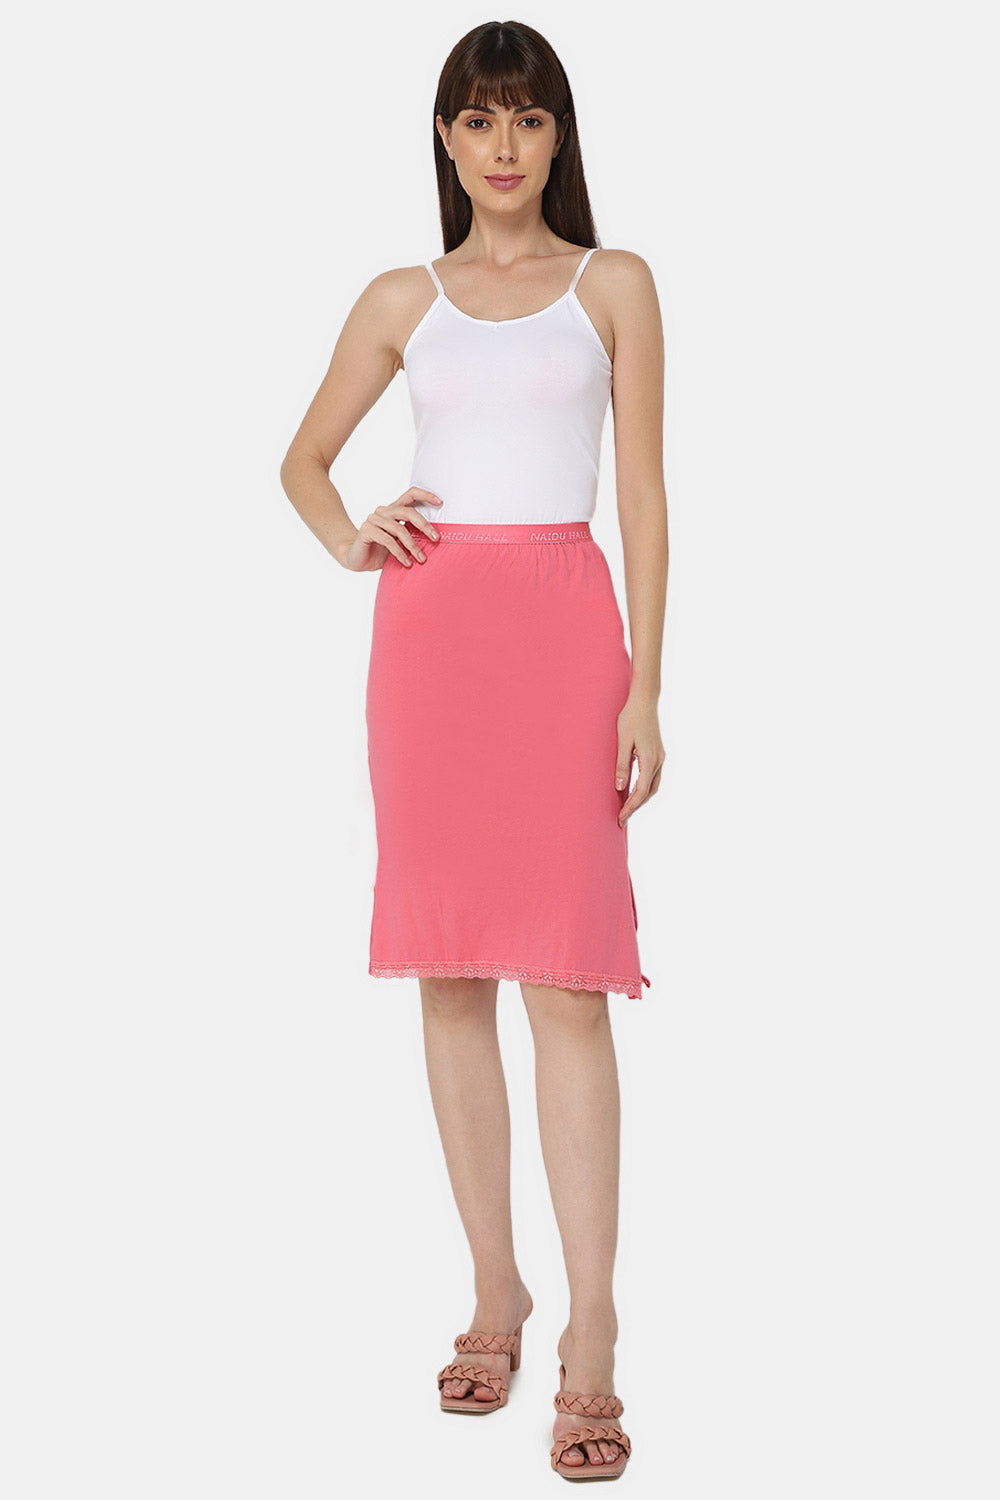 Bottom Slips to Wear with Your Stylish Skirts